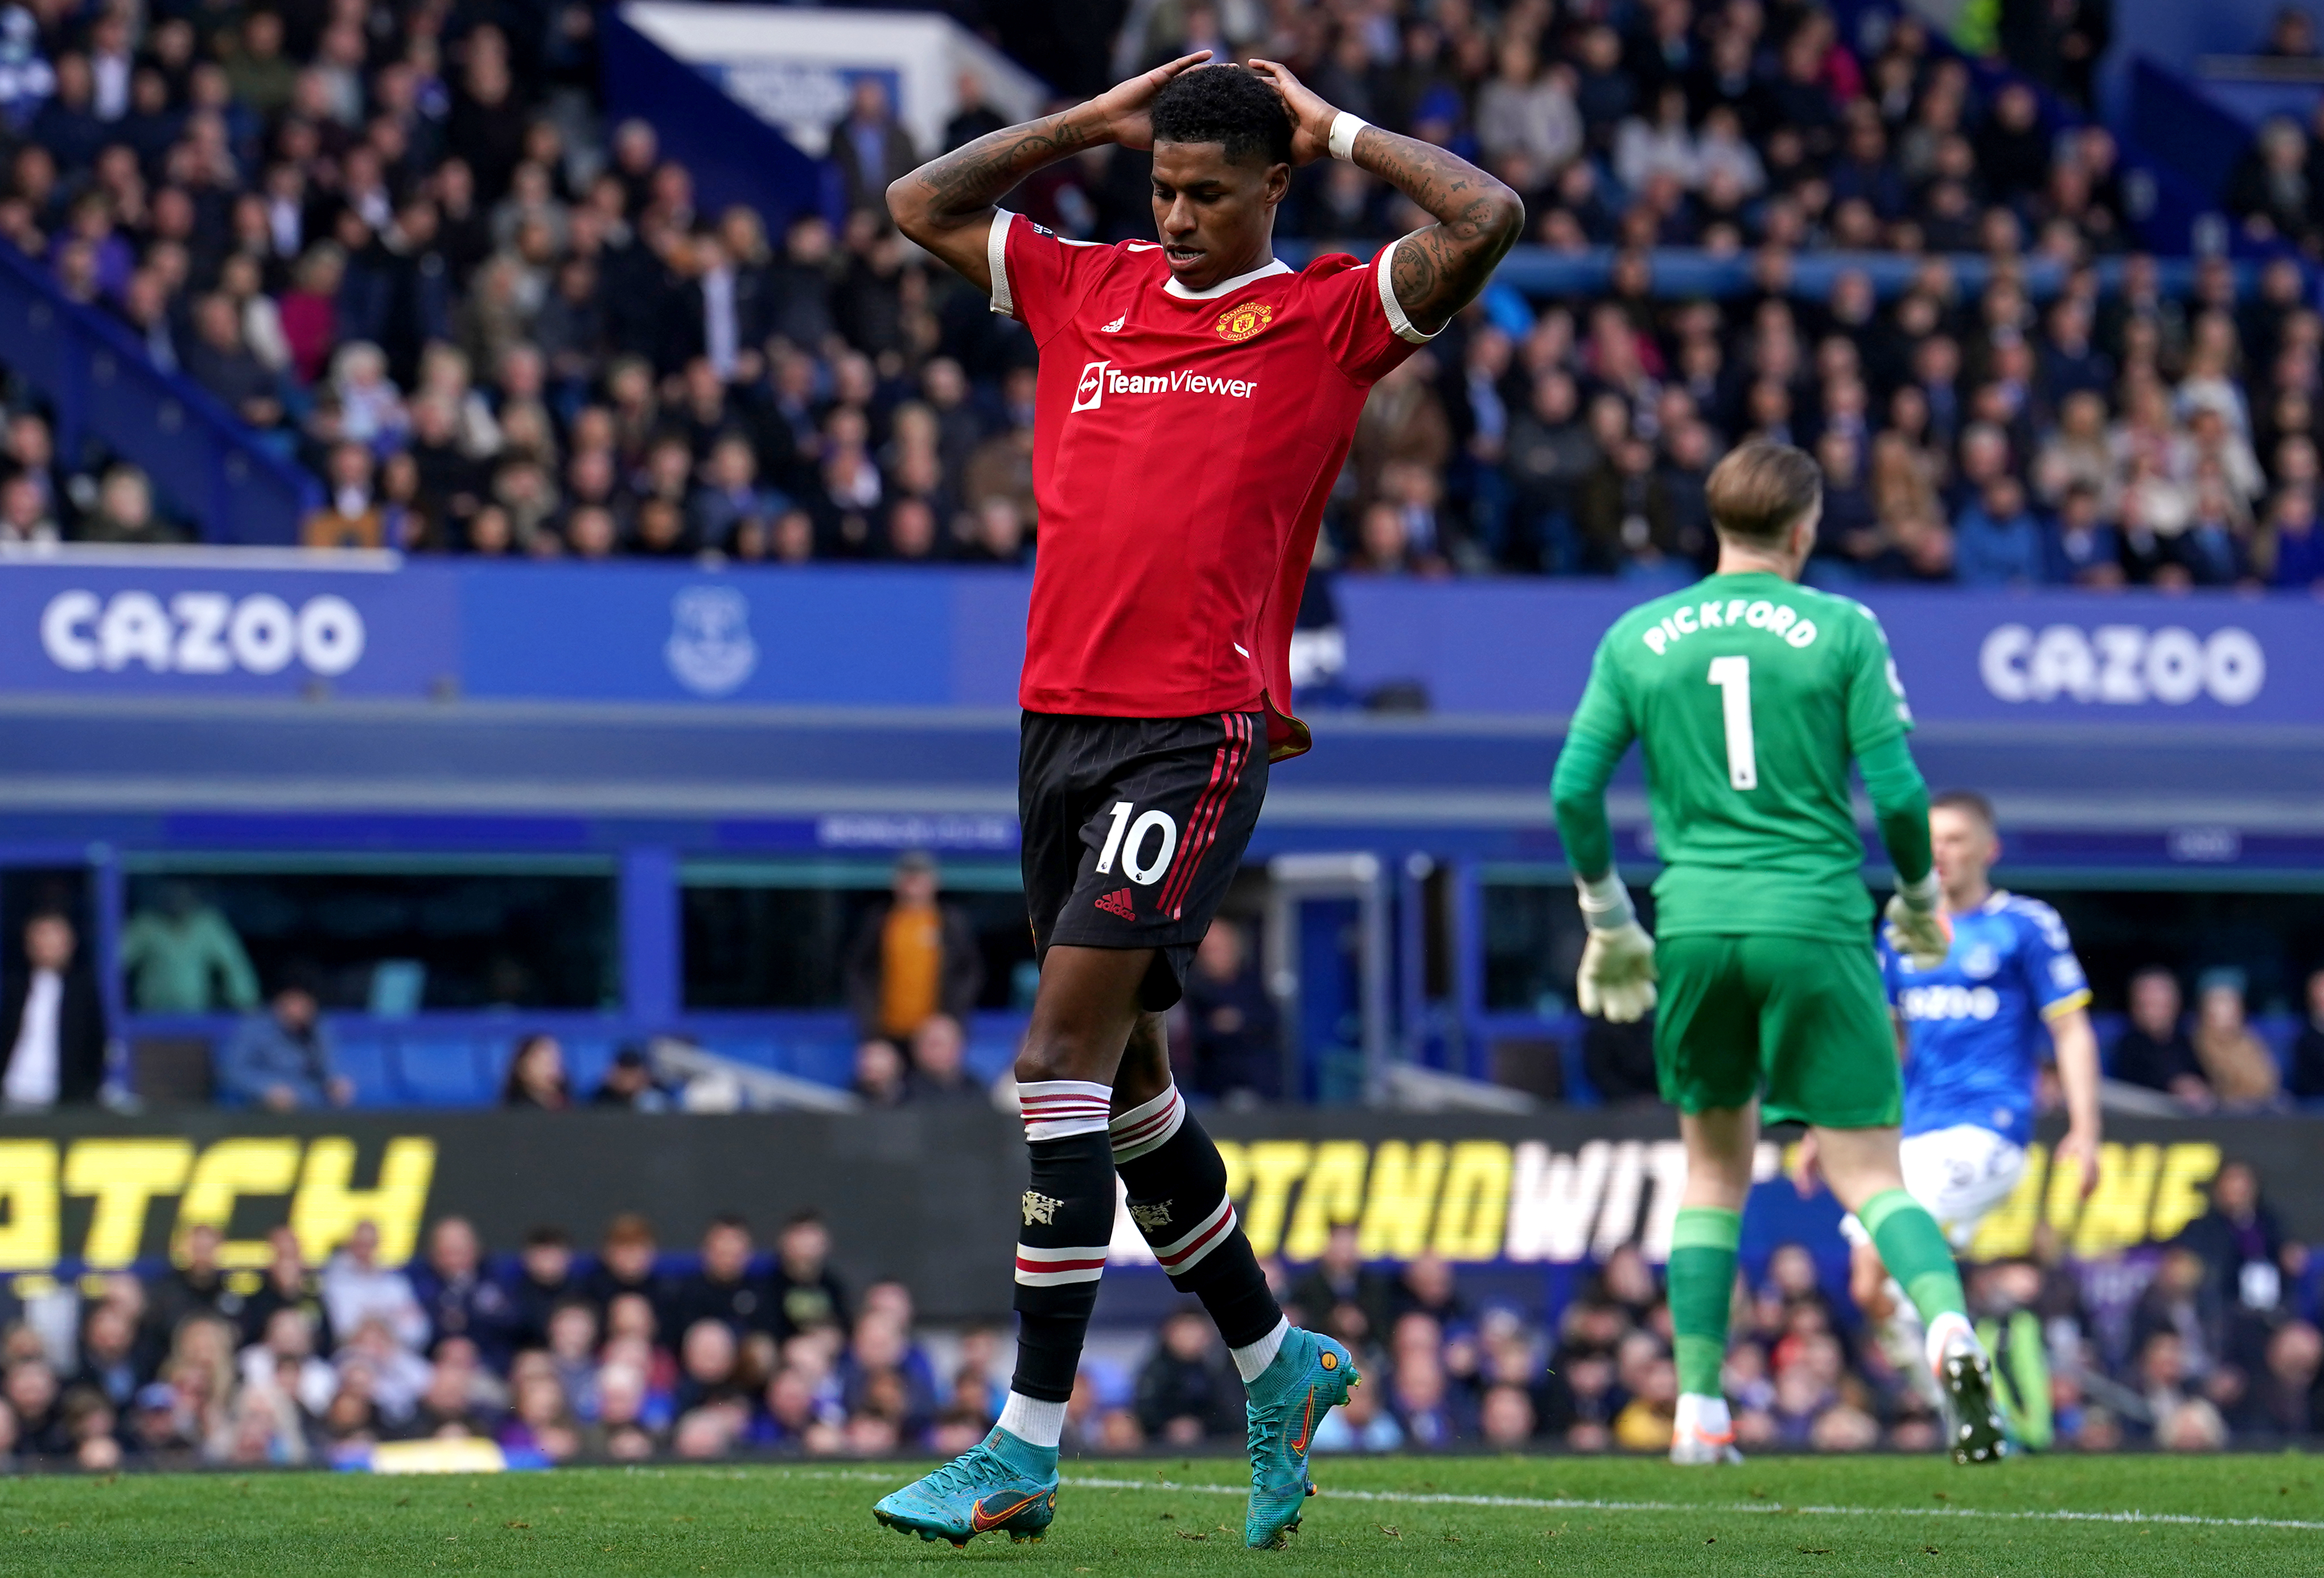 Marcus Rashford couldn't find the net